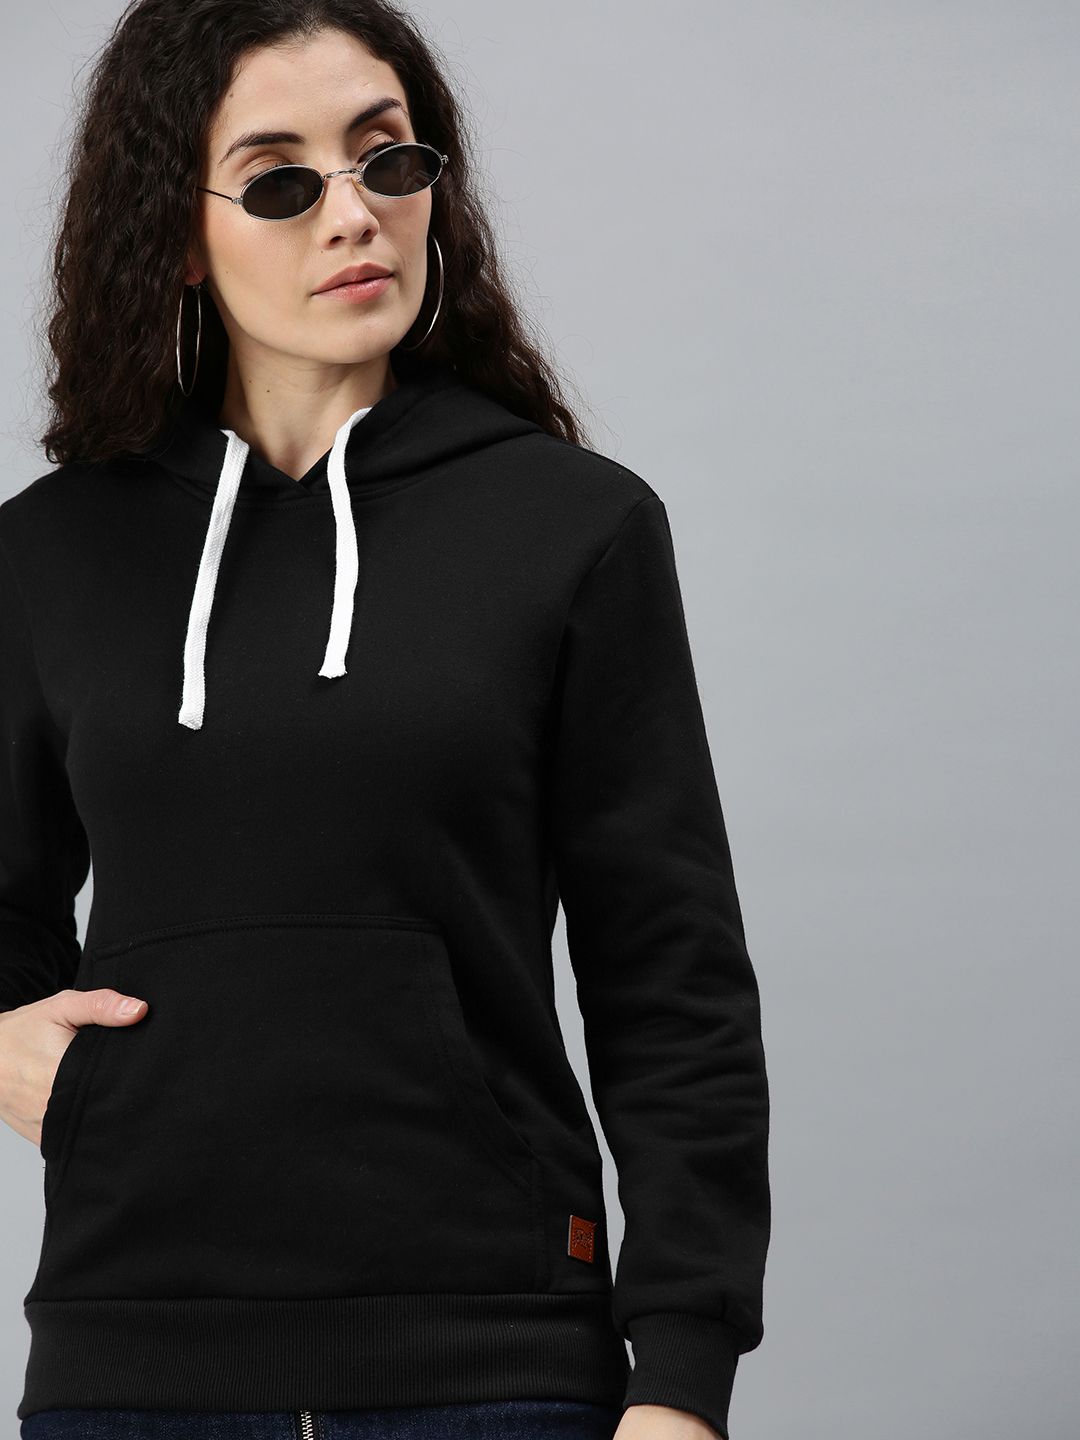 Campus Sutra Women Black Hooded Pure Cotton Sweatshirt Price in India